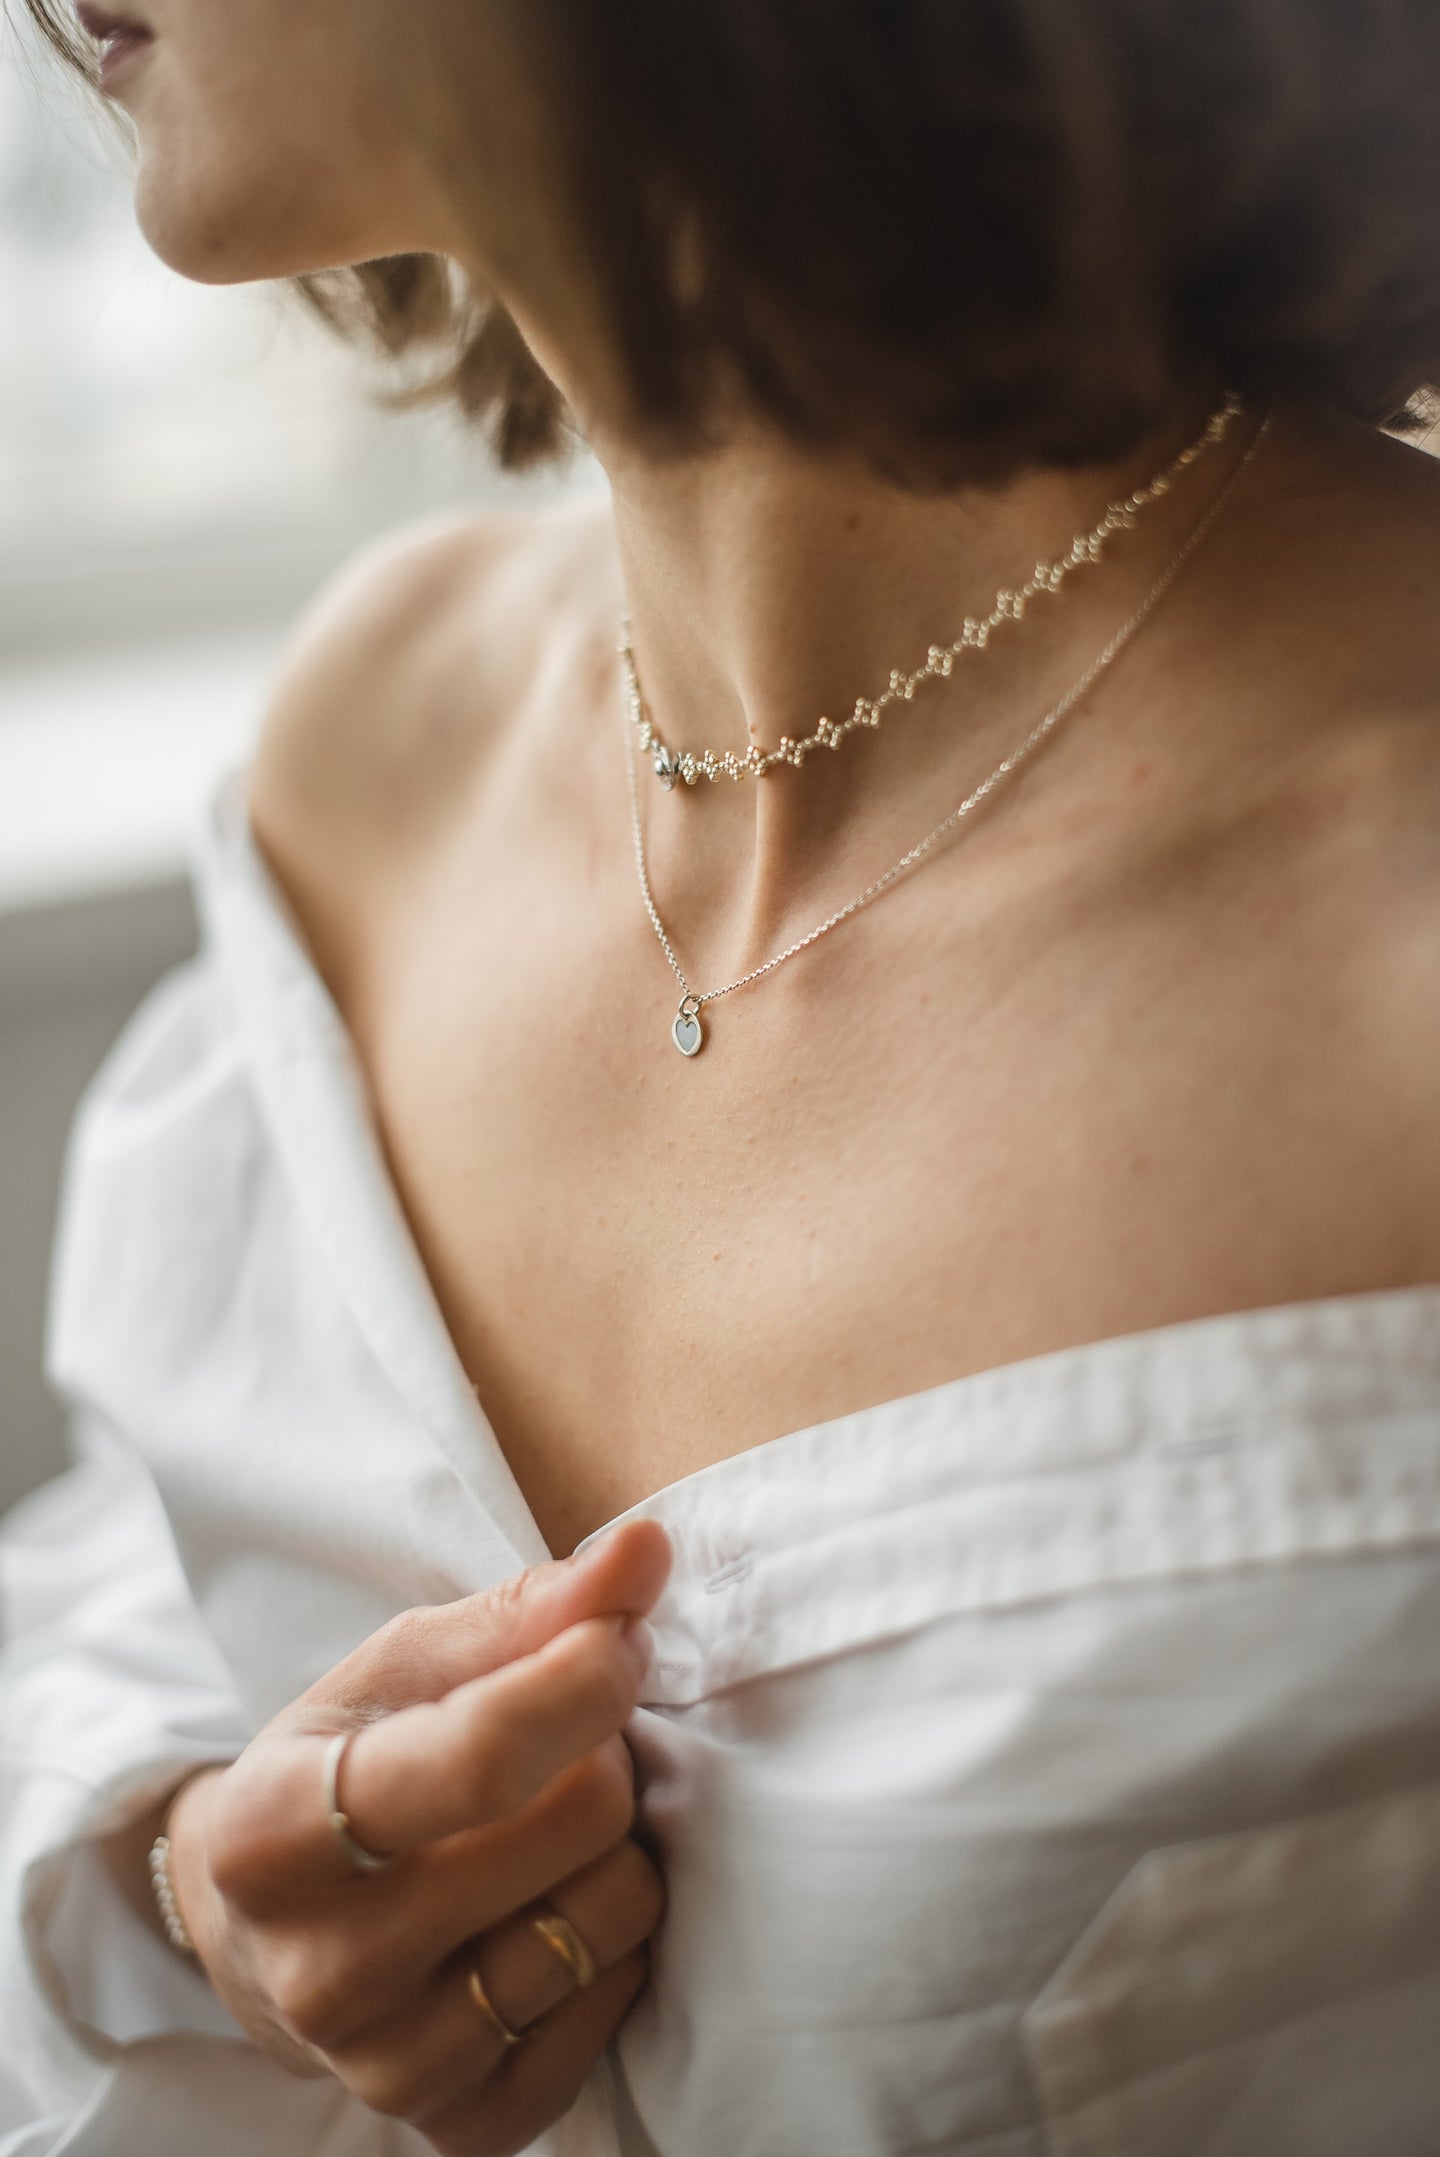 Necklaces & Chokers for Women | AVO Jewelry